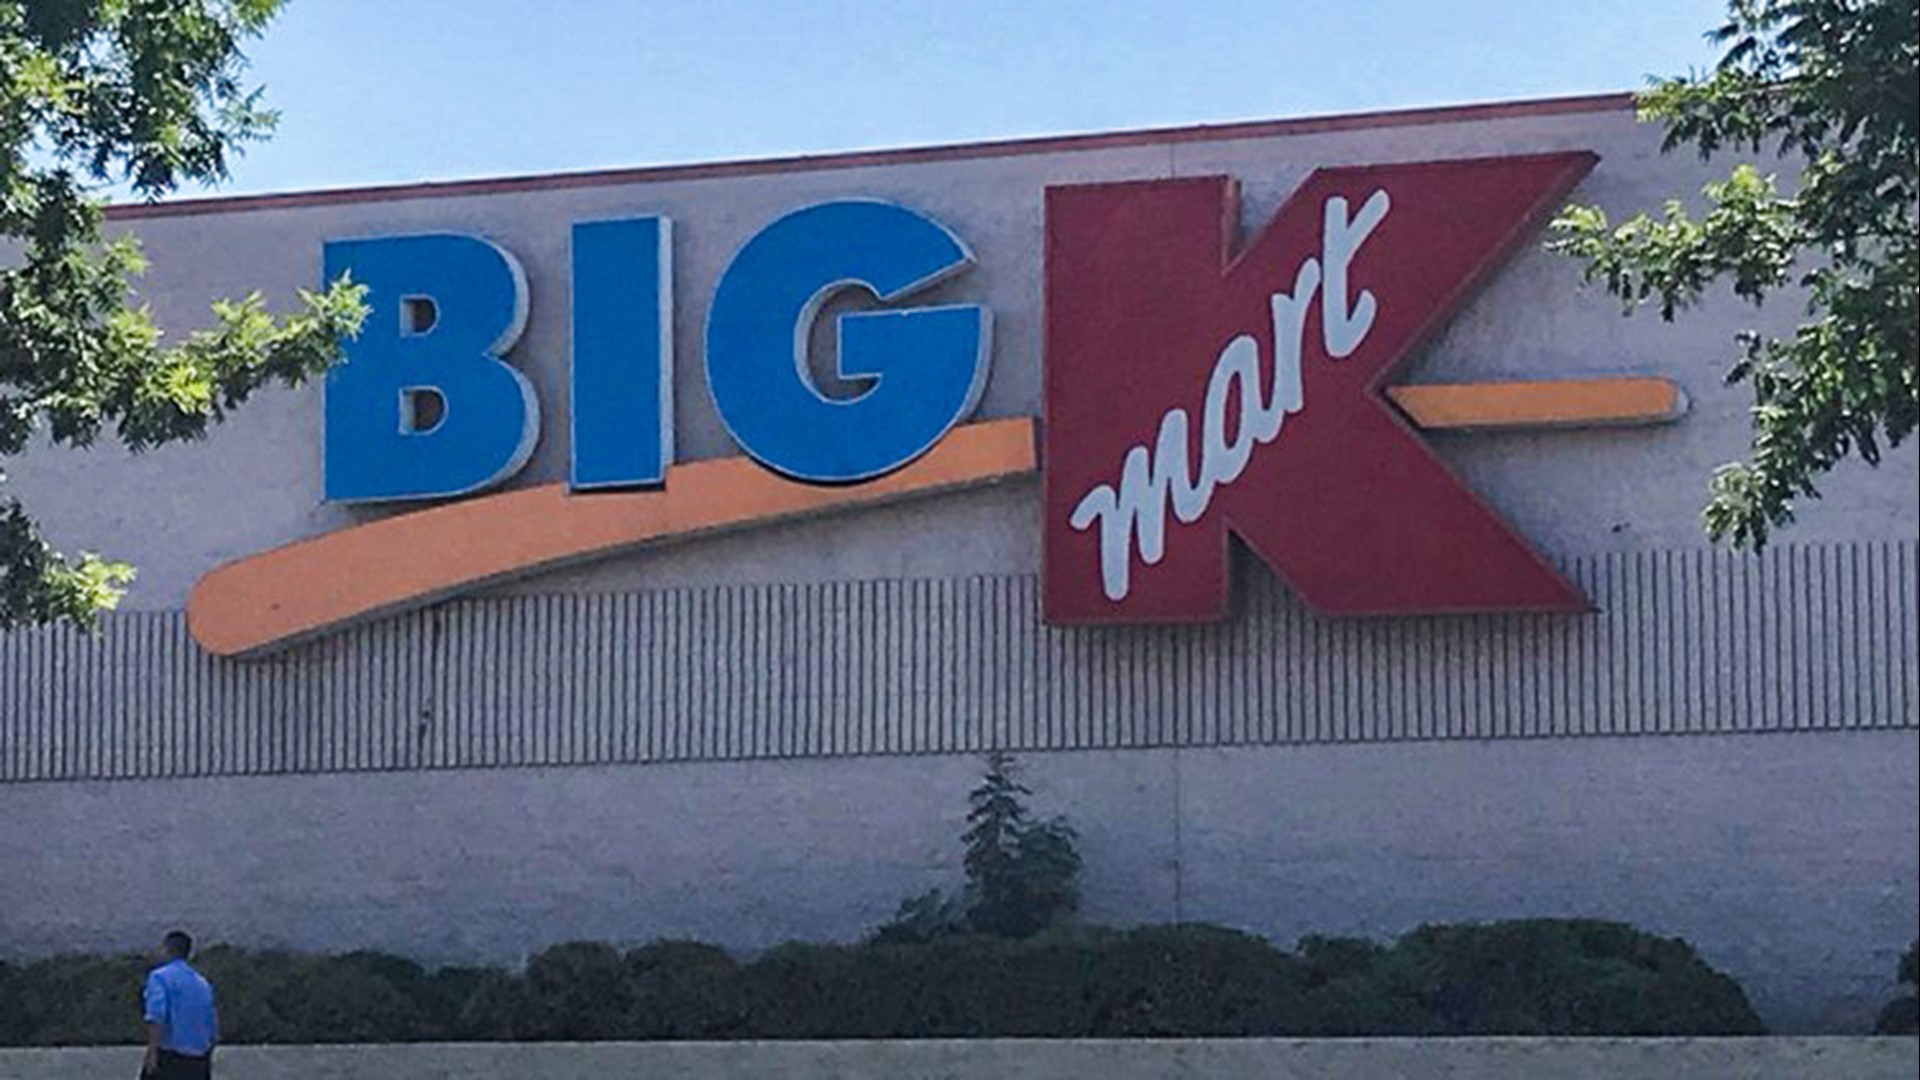 The last Kmart in California closes on Dec. 19. It will eventually be replaced by a new Target at the McKnight Crossing center.